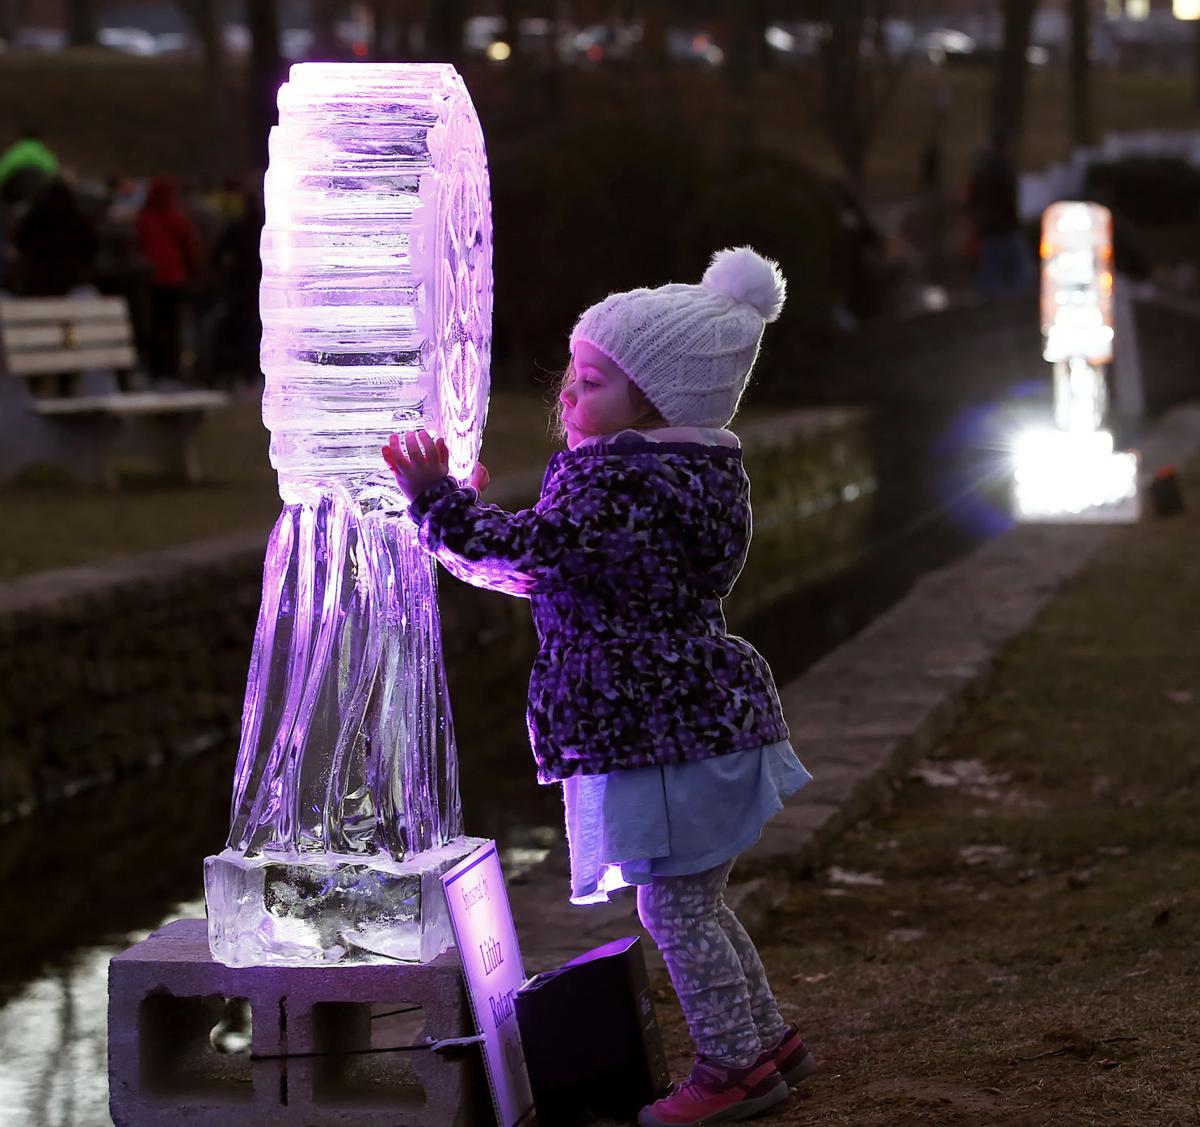 Crowds admire over 40 ice sculptures during first night of Lititz Fire